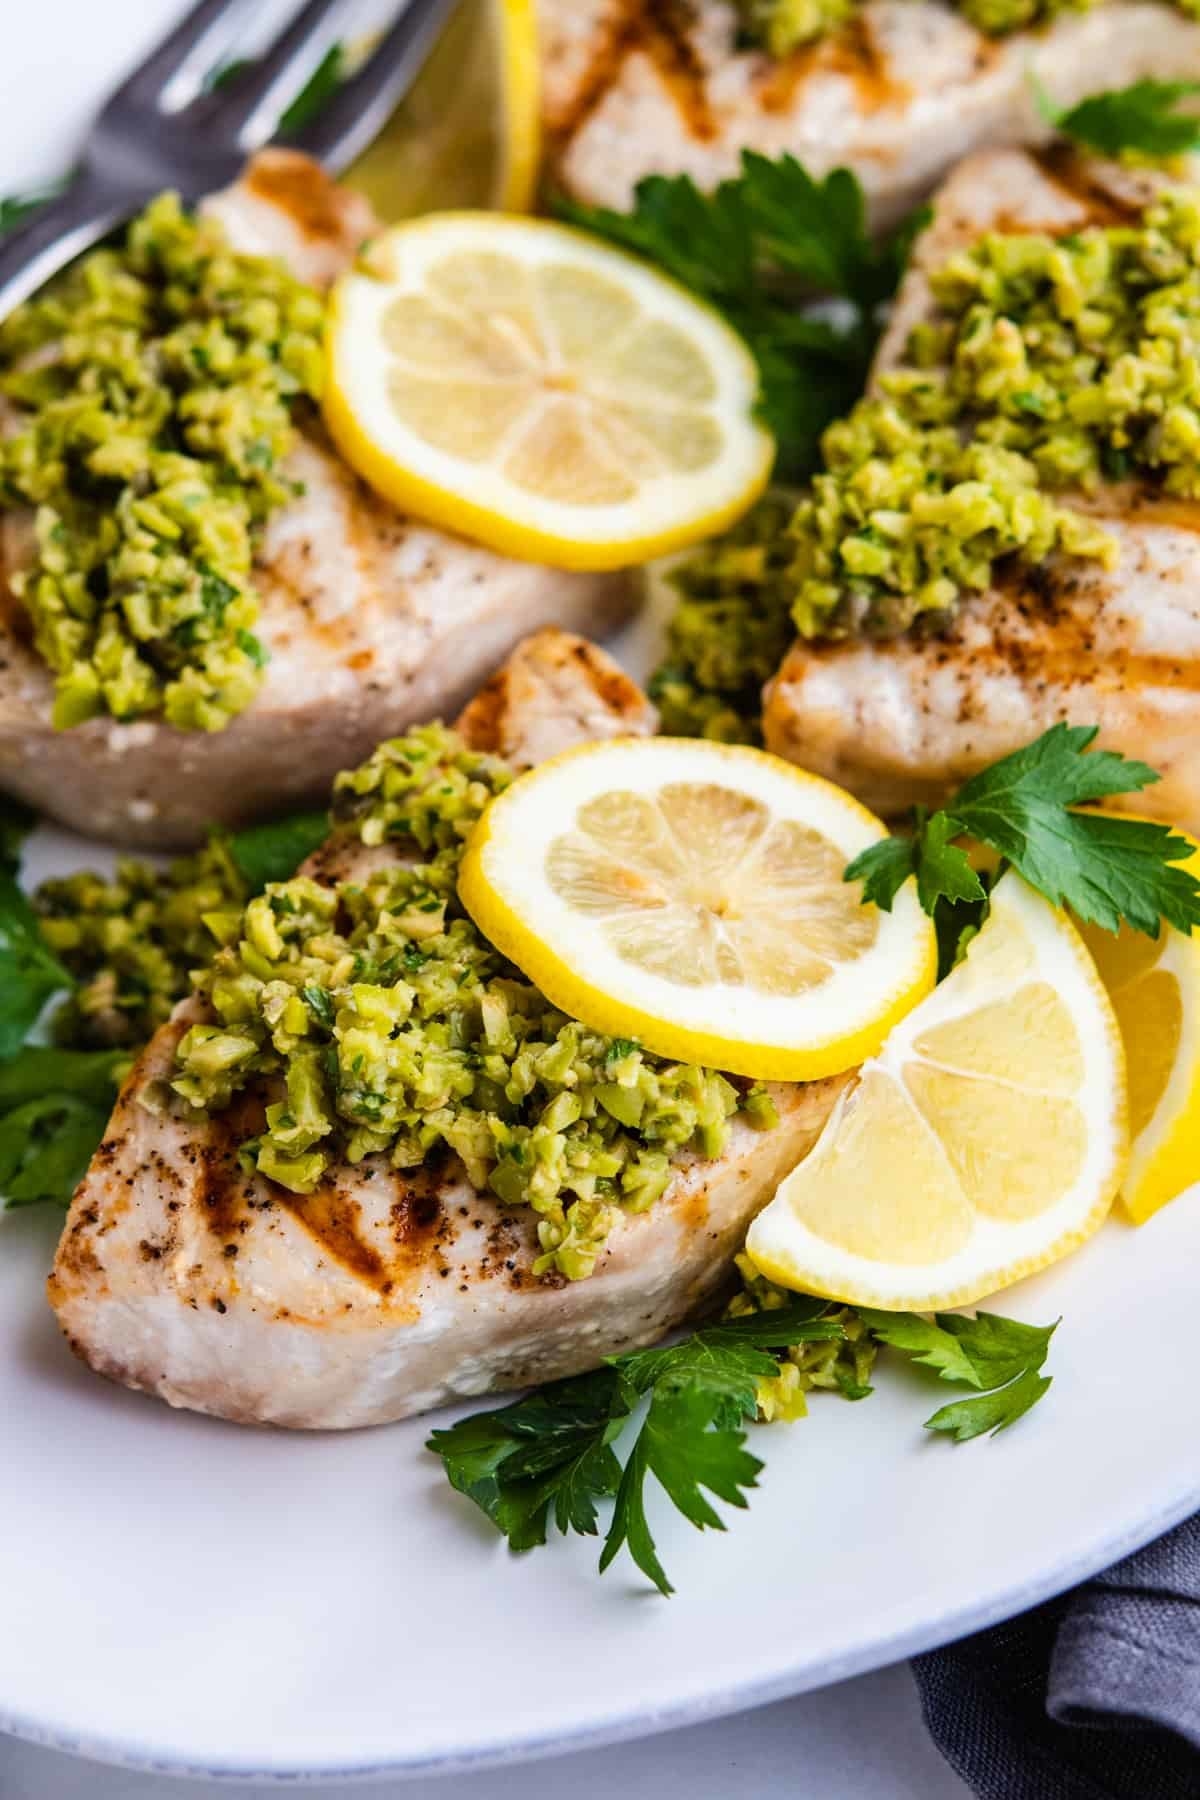 Tender, buttery grilled swordfish topped with a bright and briny green olive tapenade.